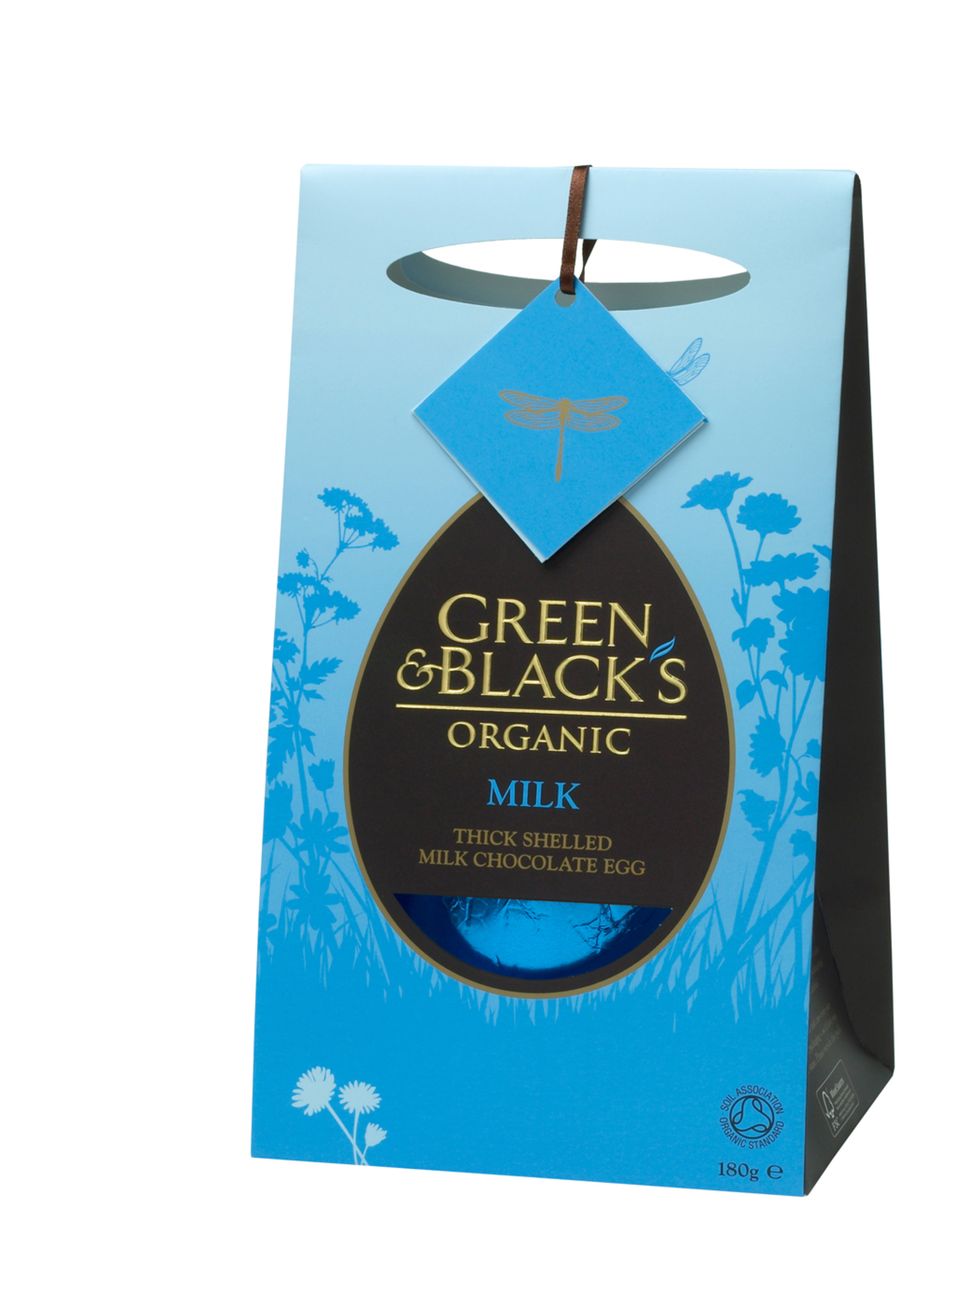 <p><strong>Treat: <a href="http://www.greenandblacks.co.uk/our-range/Easter/Milk-Egg?p=2643&amp;c1=1560">Green &amp; Blacks Milk Egg</a></strong><strong> Calories: 1110 Calories</strong></p><p><strong>Activity: Elliptical Trainer</strong><strong> Time: 85